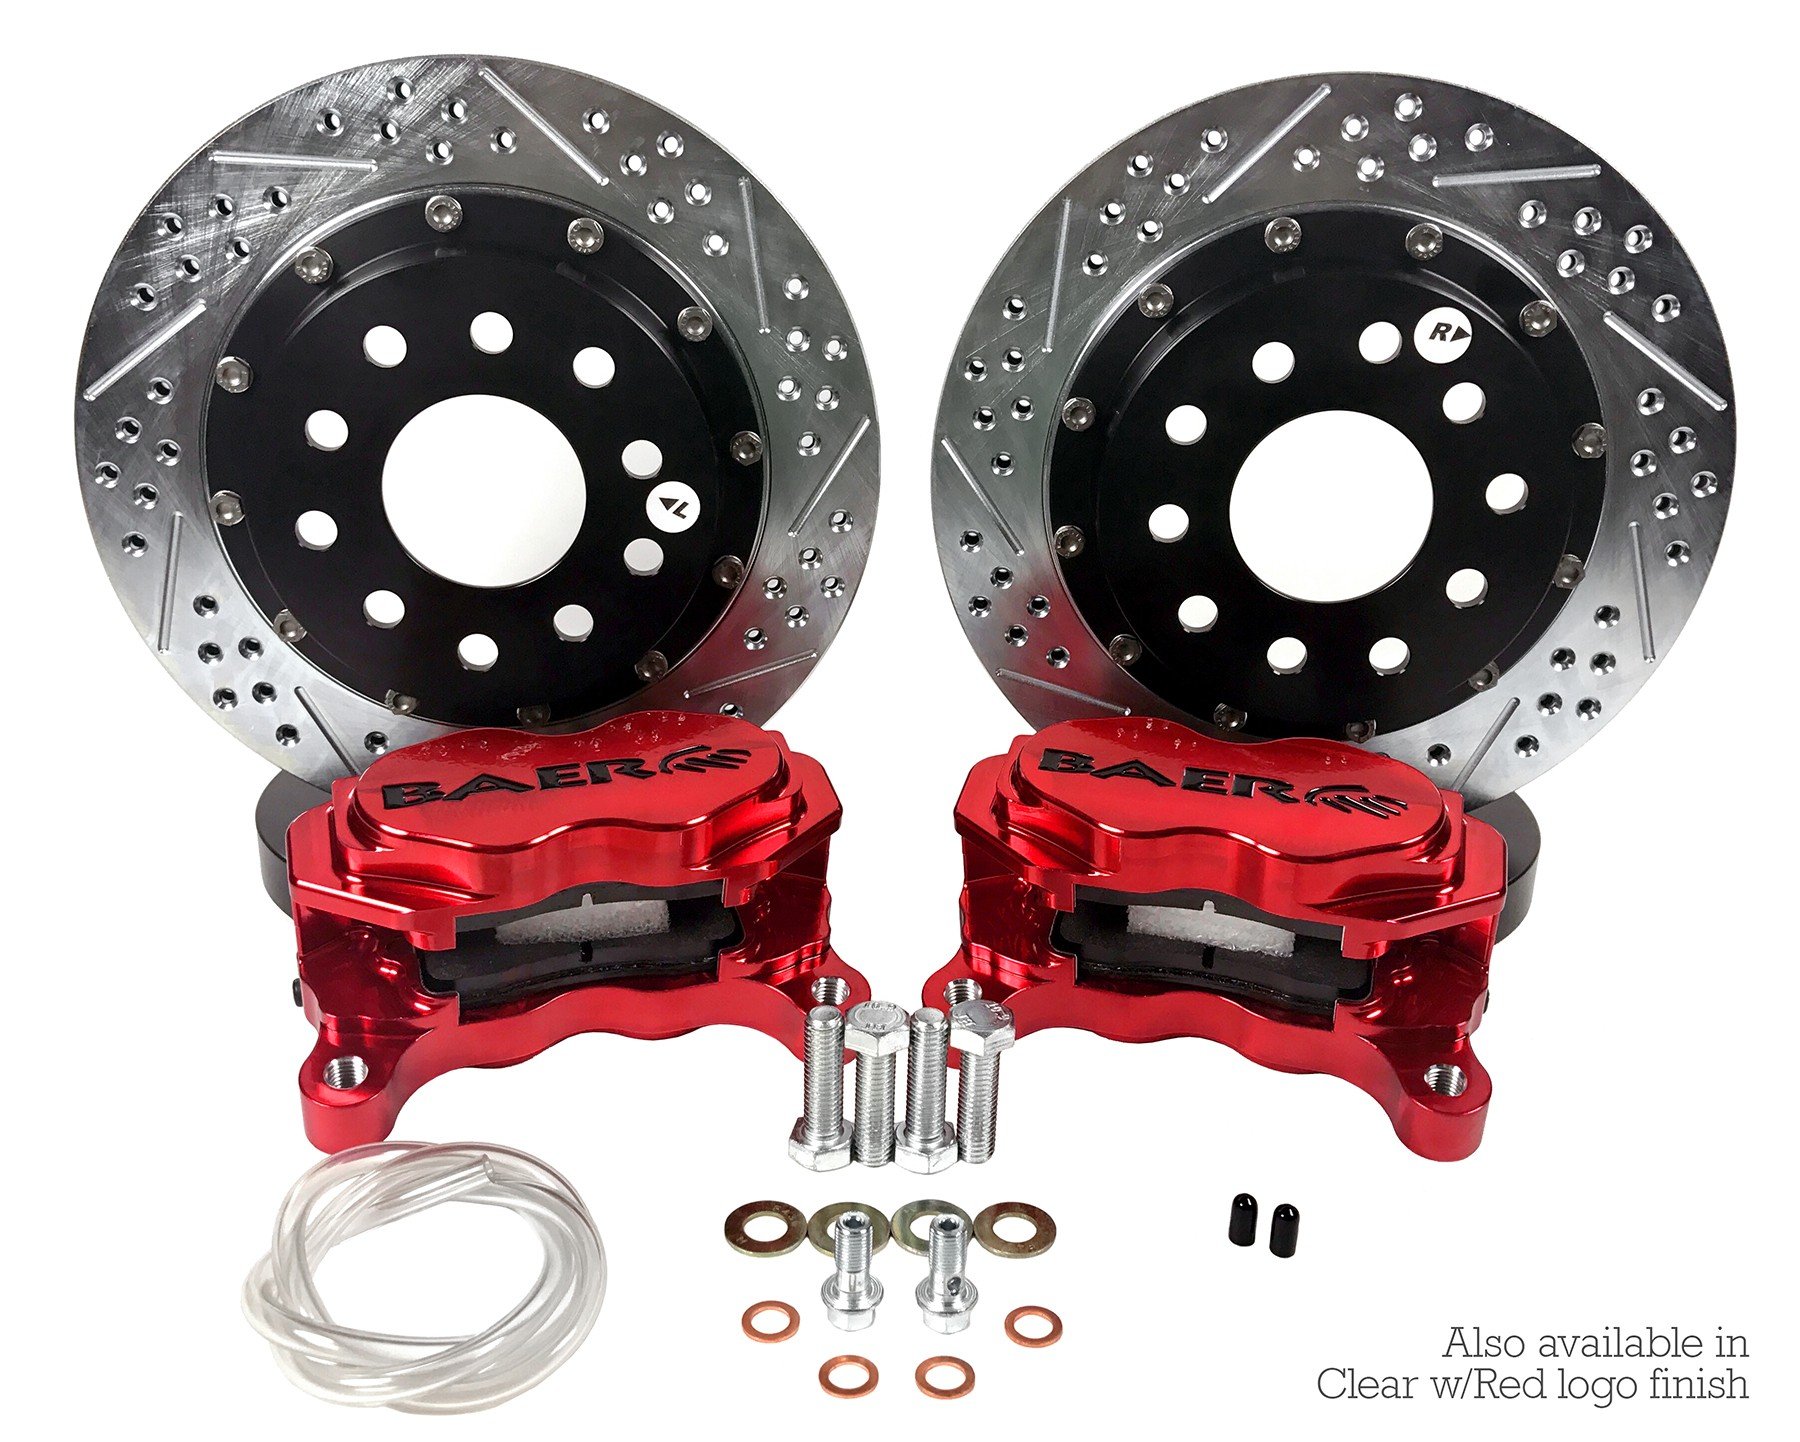 11" Front SS4+ Deep Stage Drag Race Brake System